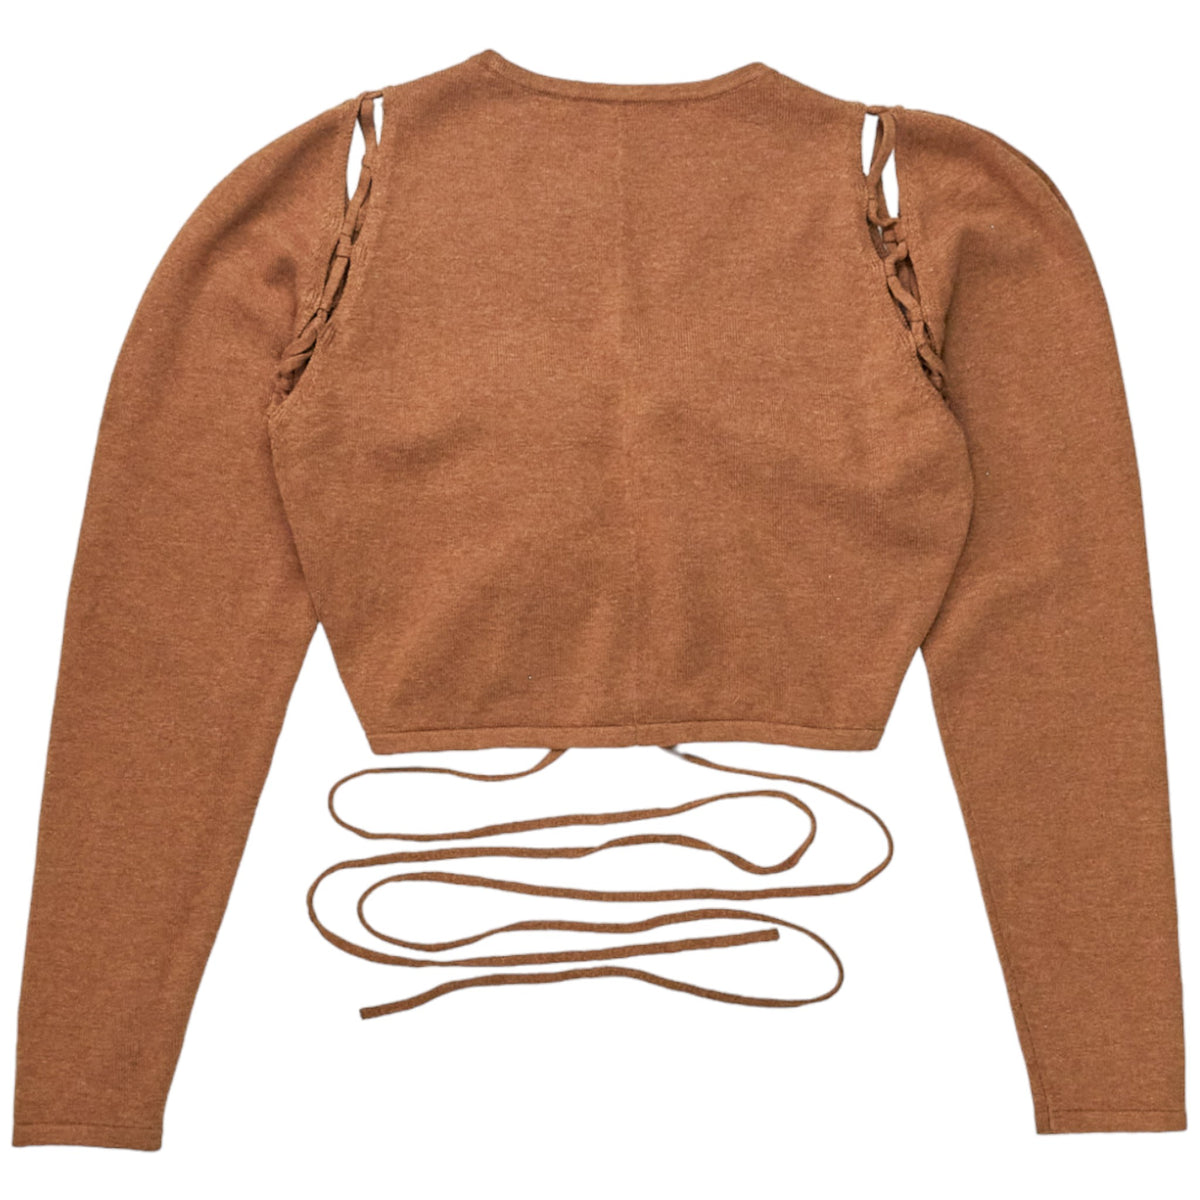 Sunset Lover Brown Cut-Out Knit Top